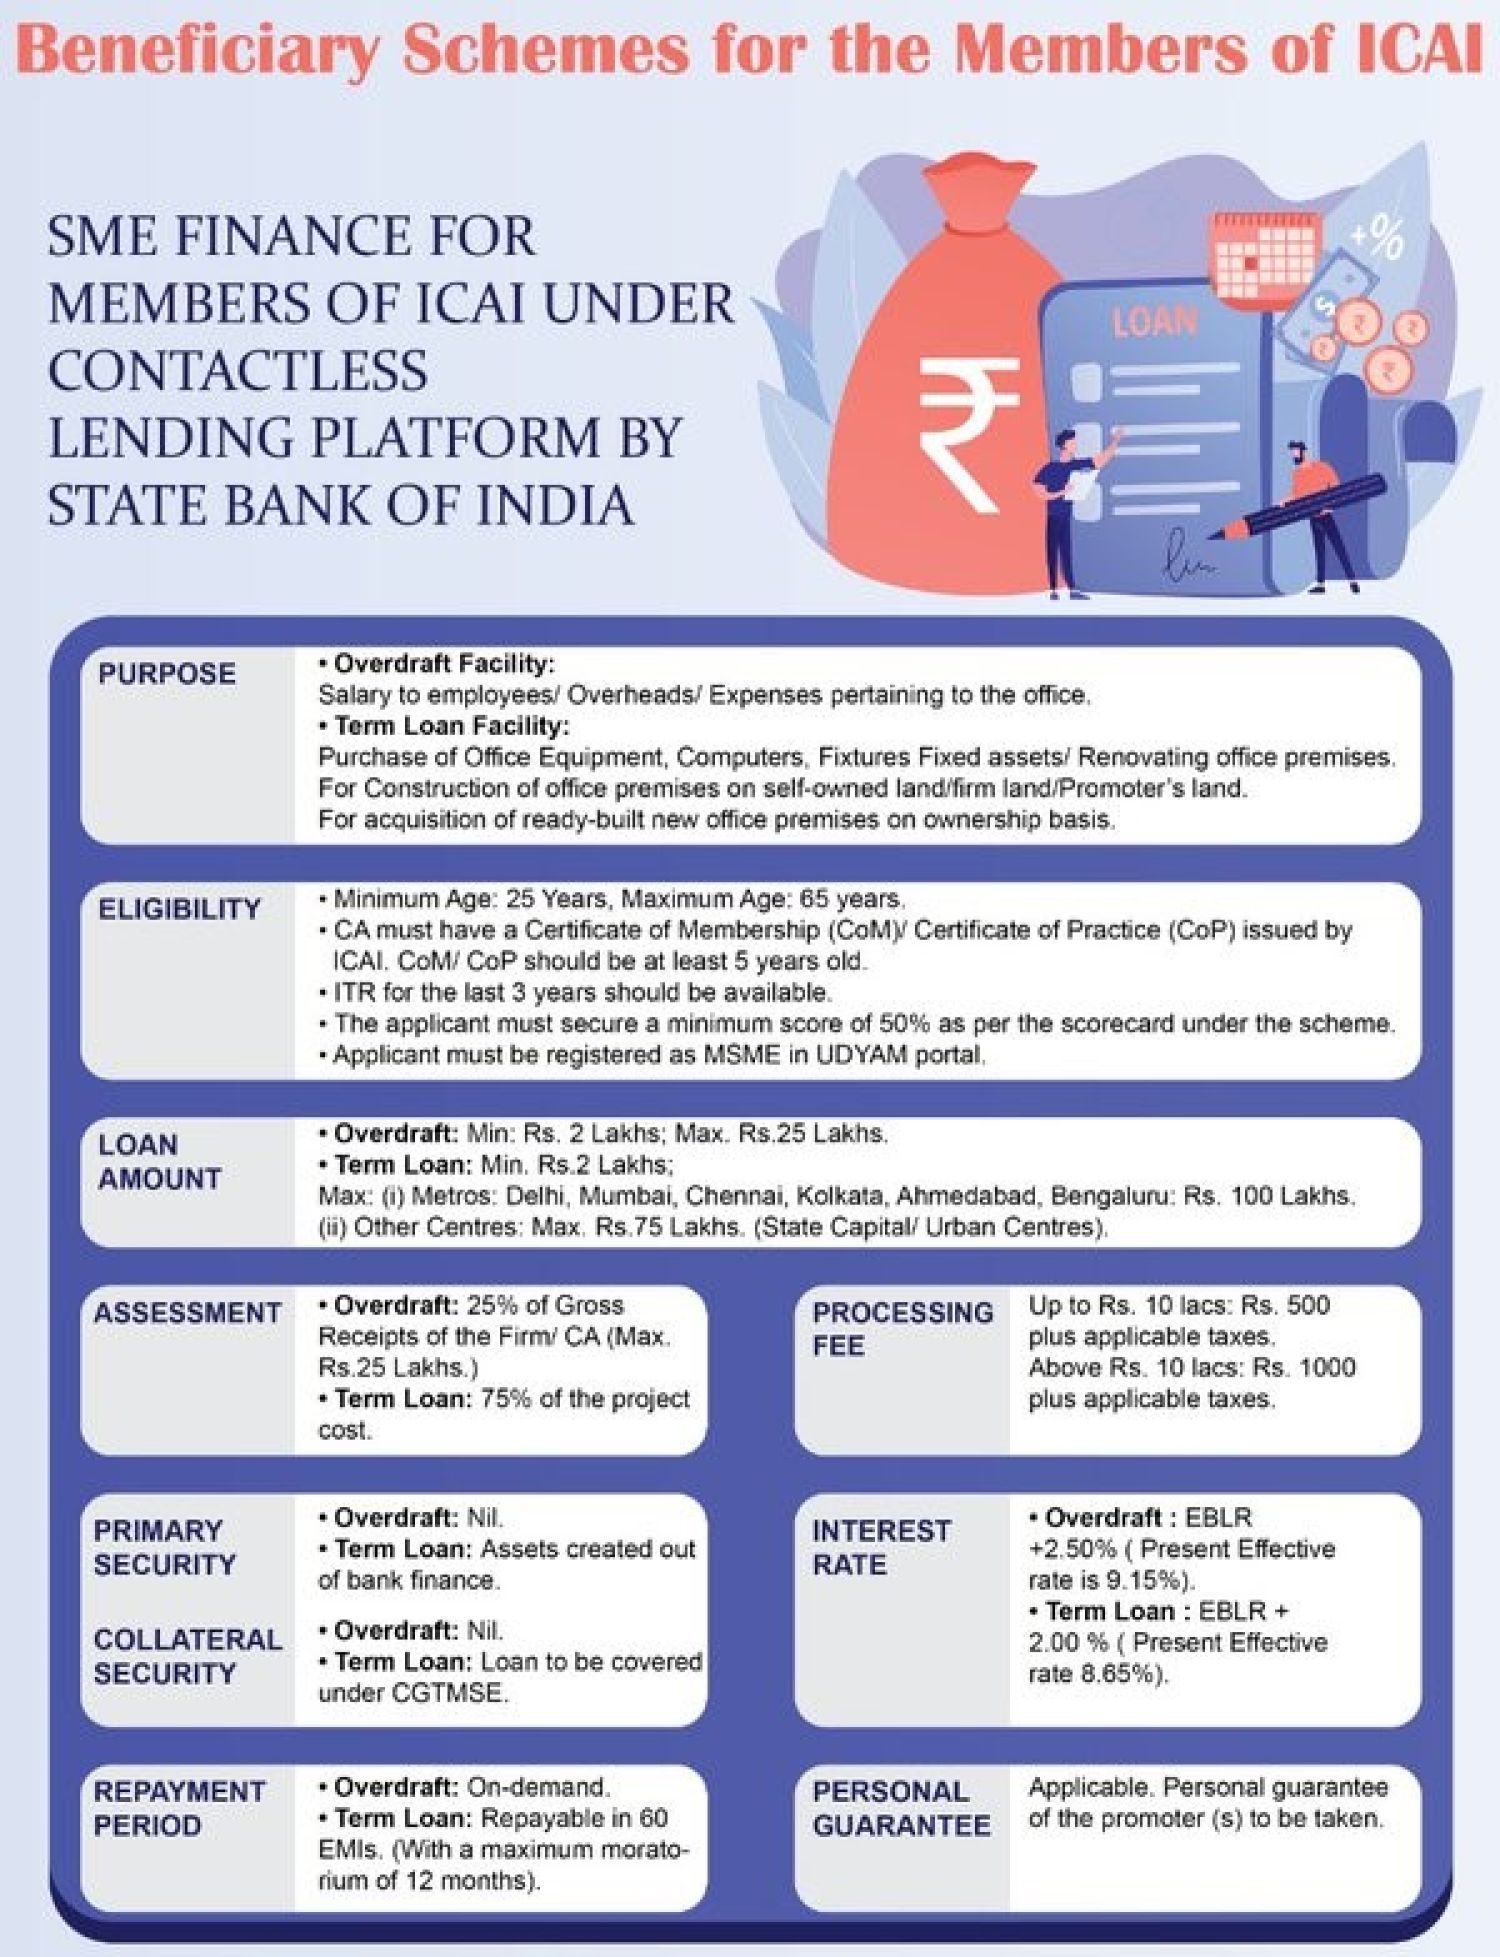 Beneficiary Schemes for the Chartered Accountants : ICAI